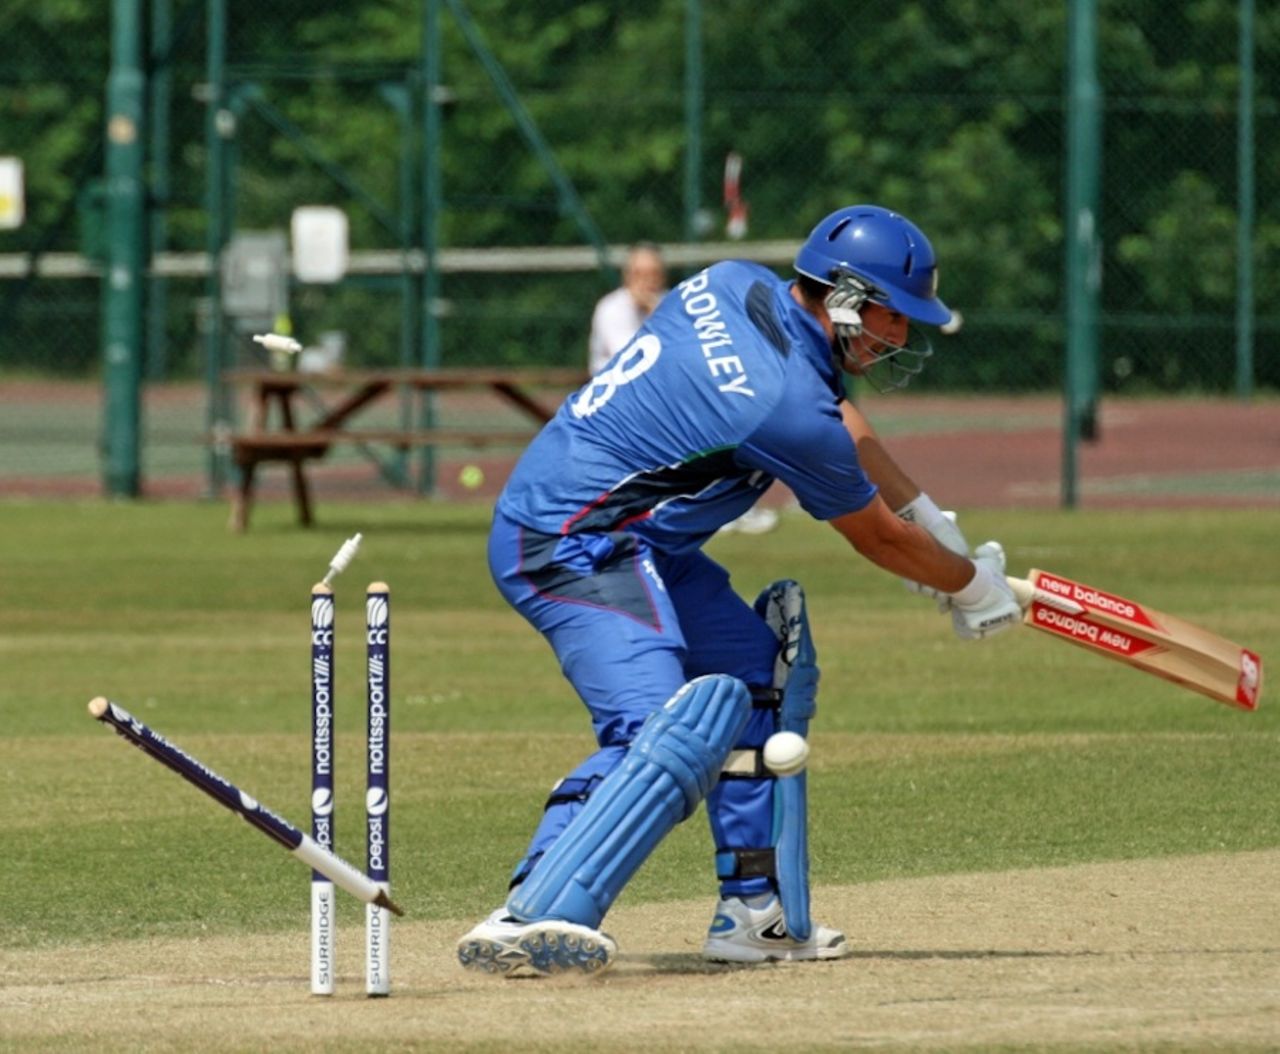 Damian Crowley was bowled for 13, Austria v Italy, European Championship Division One, Group A, Horsham, July 12, 2013